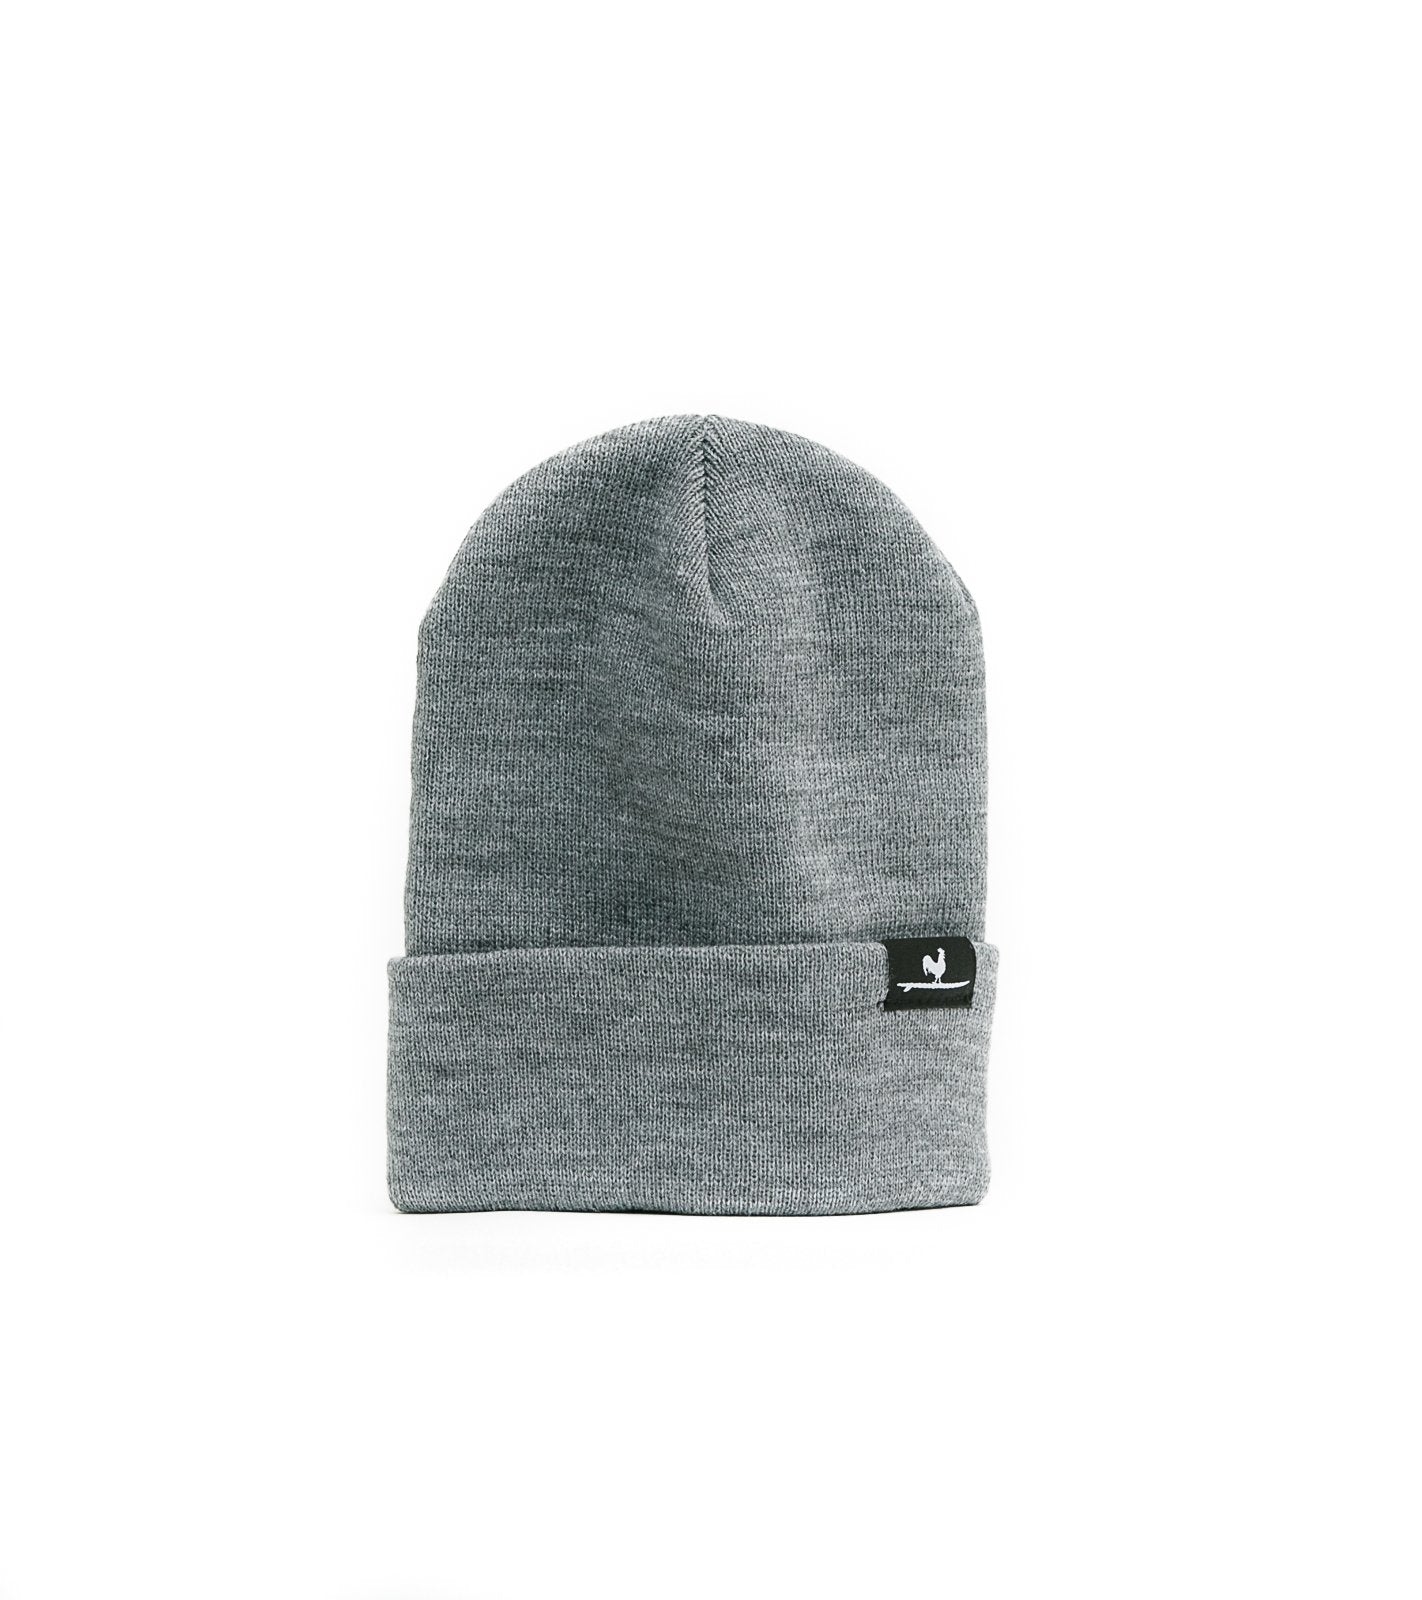 Beach and Barn Surfing Rooster Beanie - Provisions Mercantile